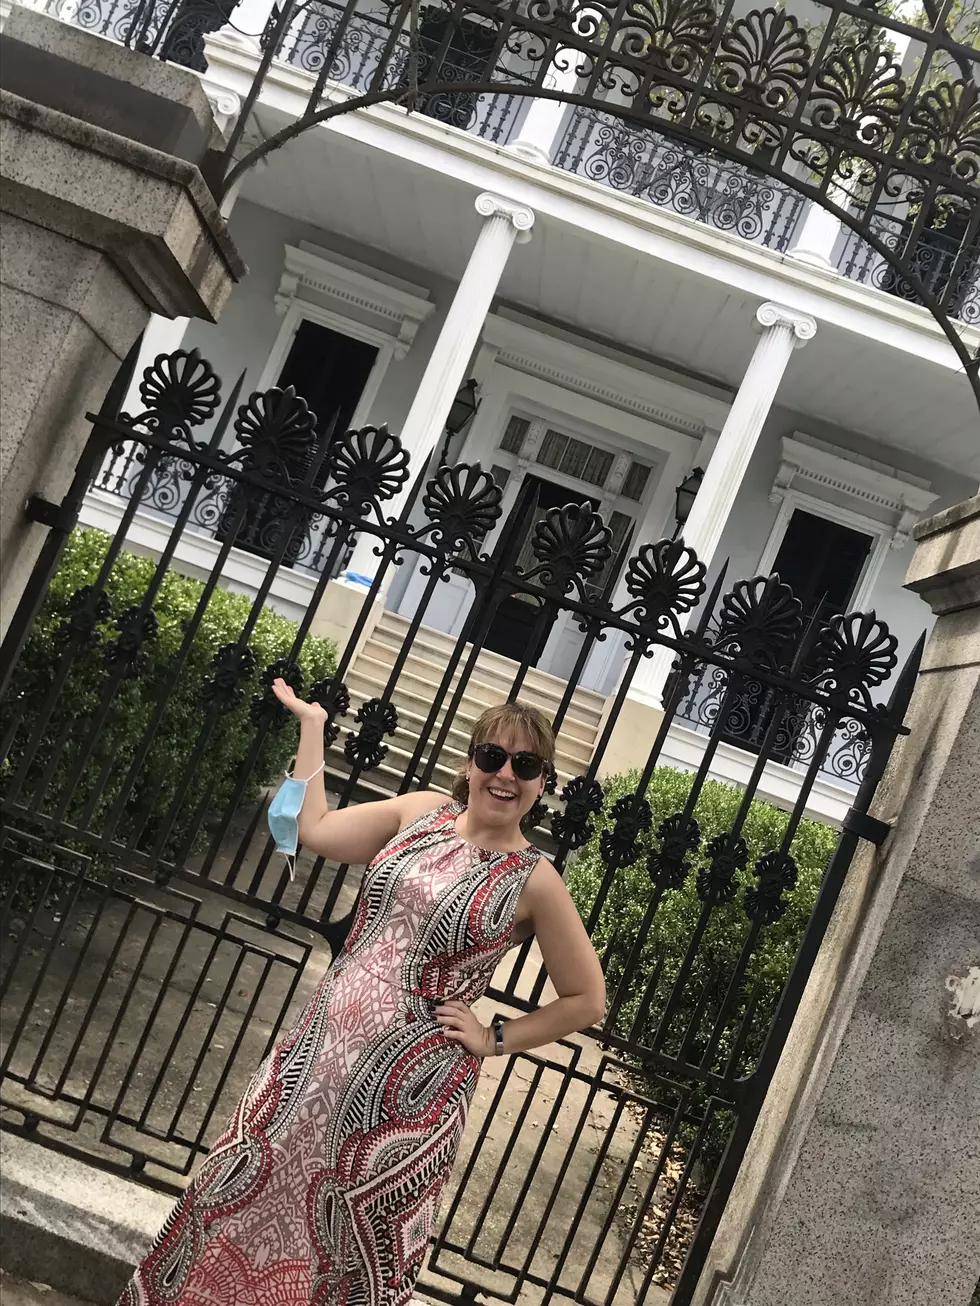 New Orleans’ Garden District, Home to ‘American Horror Story’ and ‘Real World’ Houses